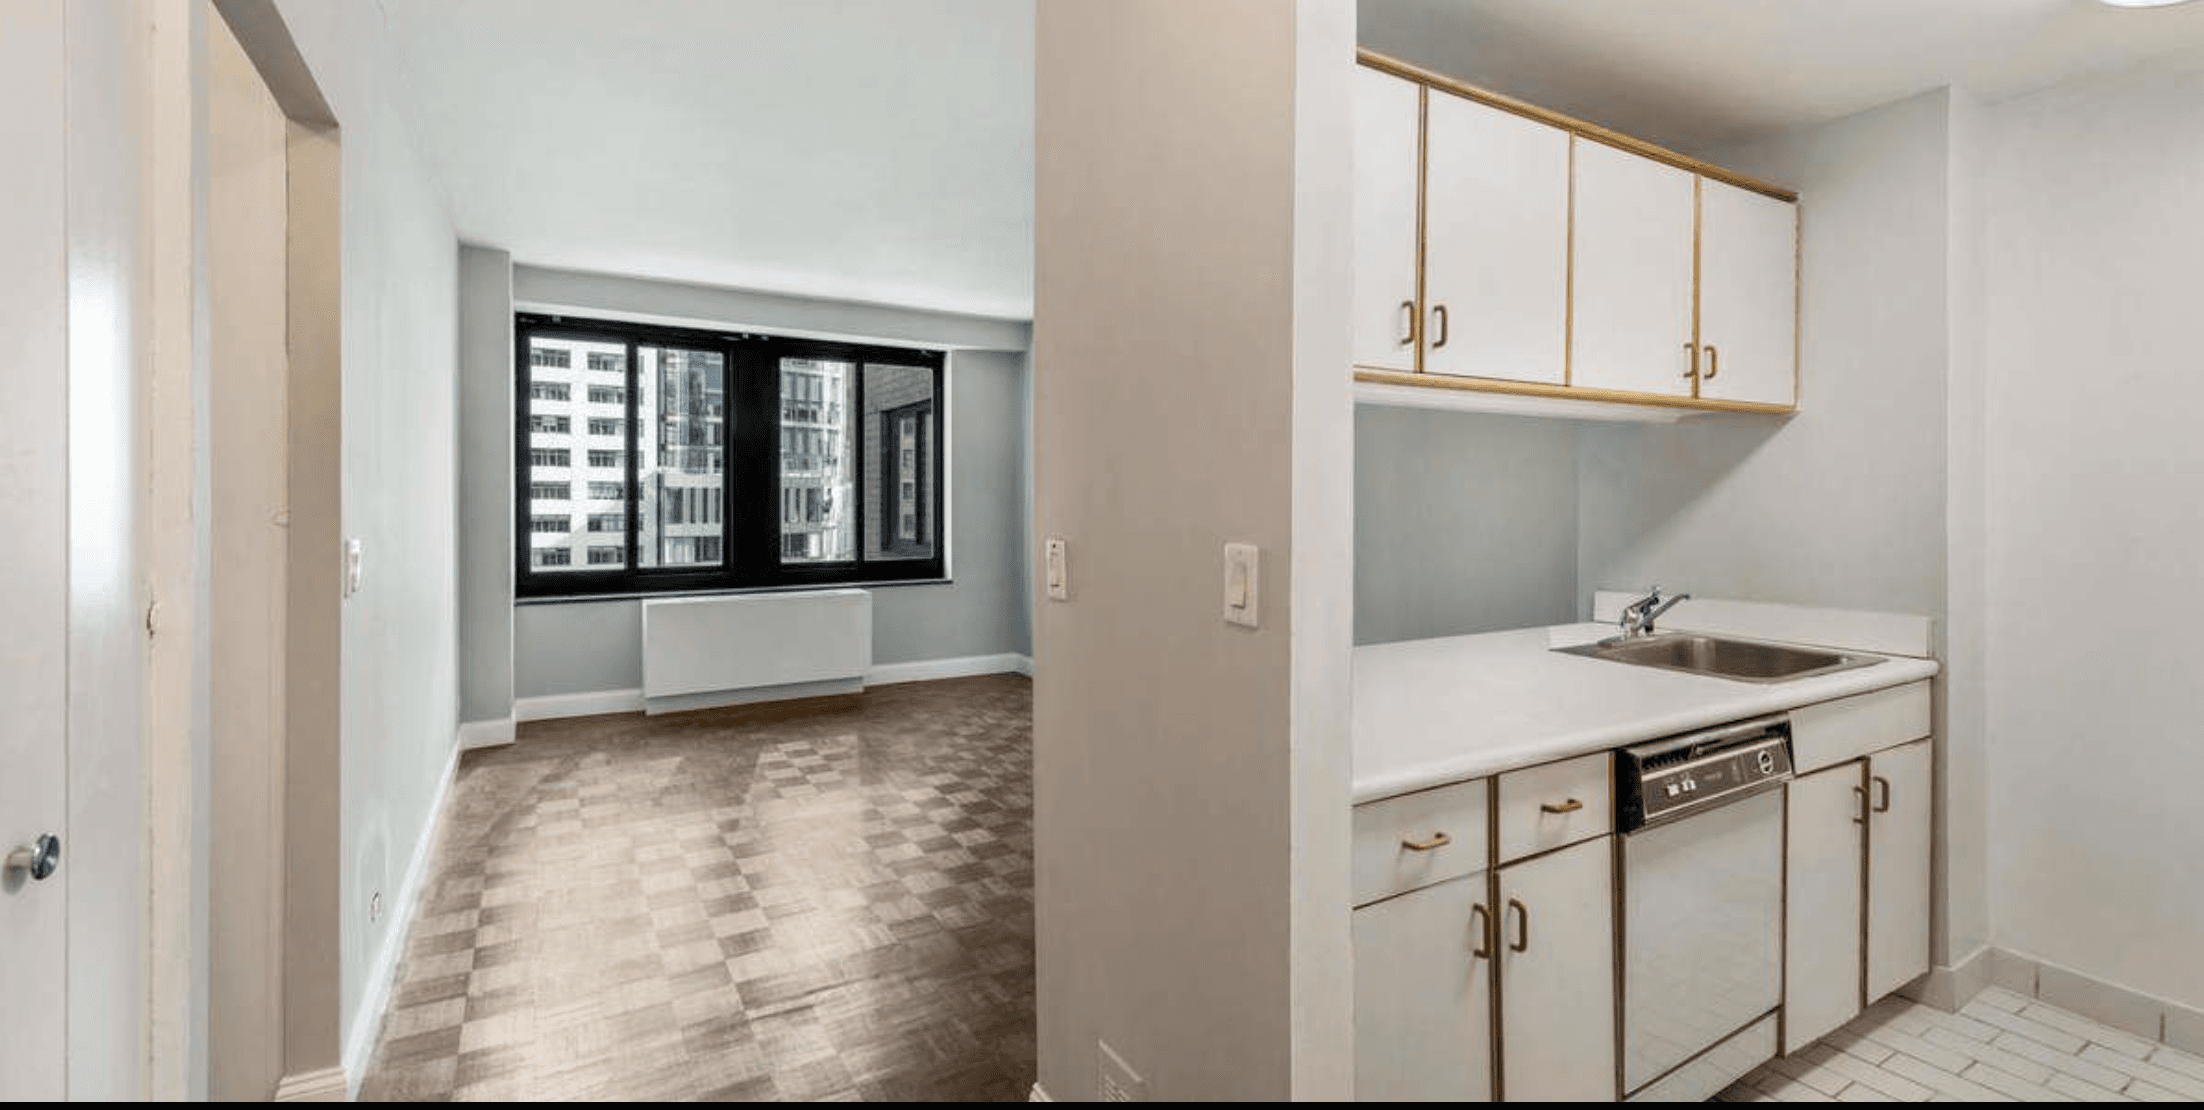 Suburbs in the city ! Welcome home to this spacious, sunny 1BR with hardwood flooring, oversized windows and abundant closet space.